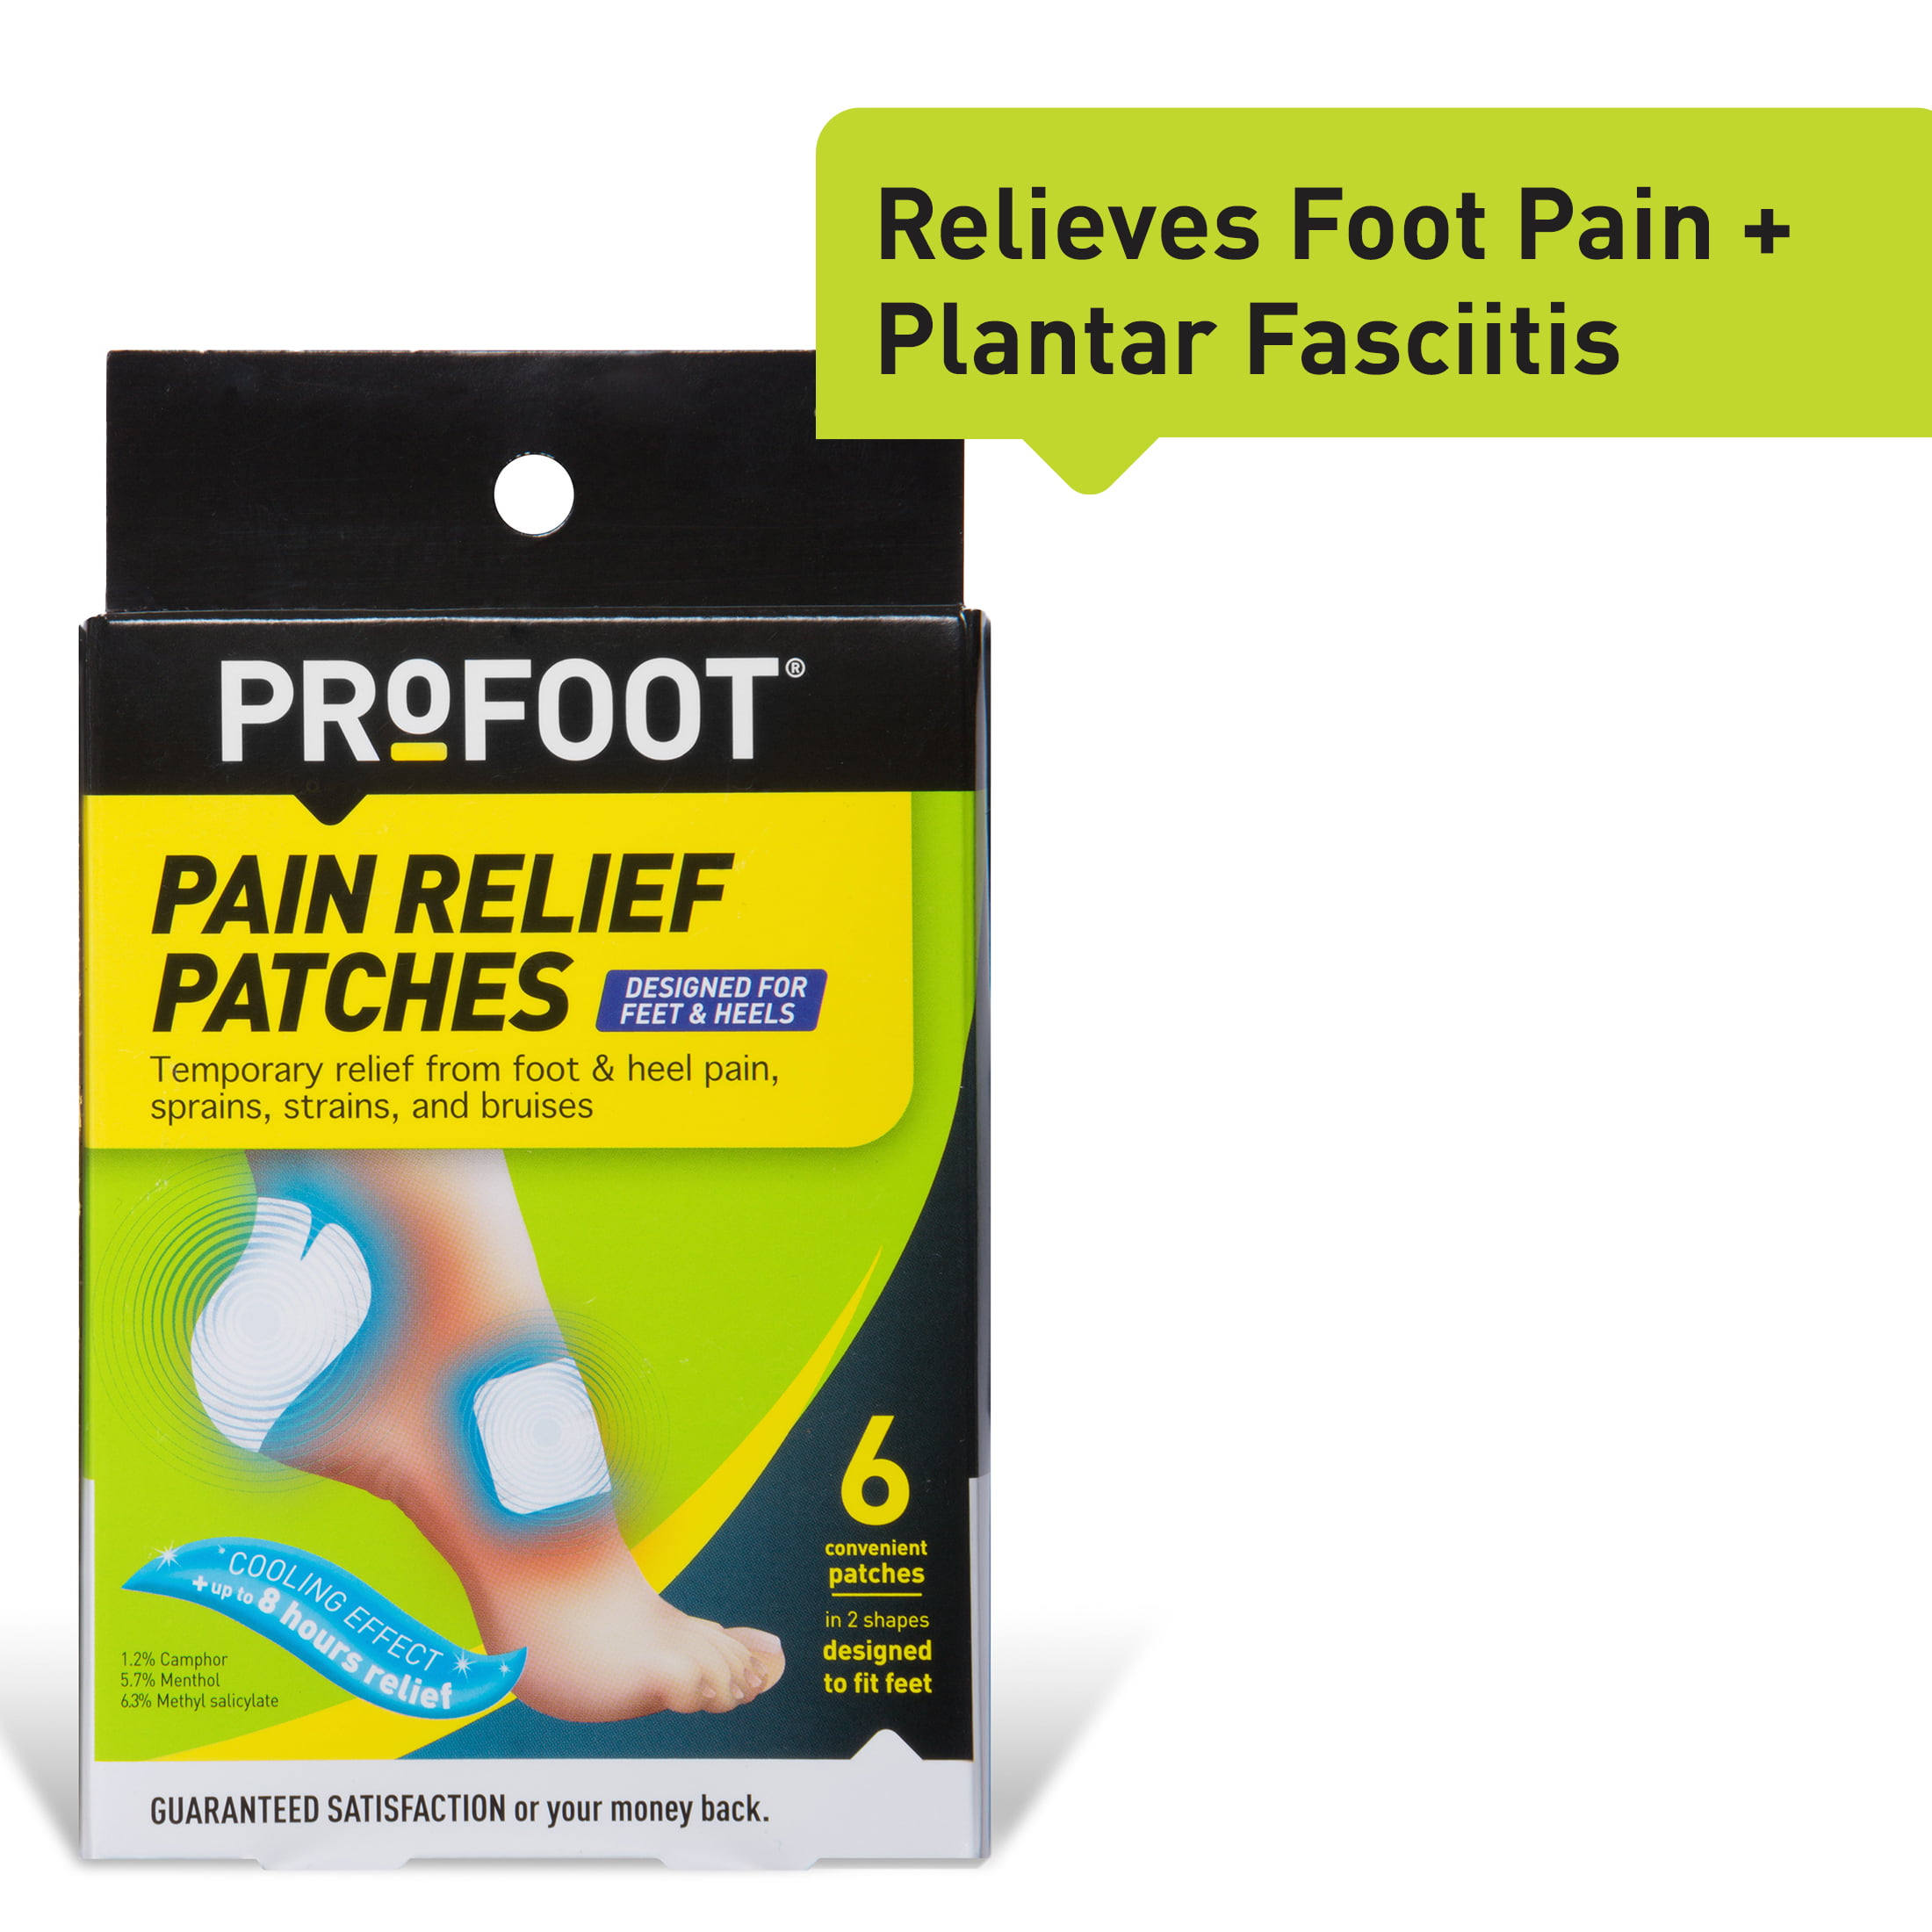 PROFOOT Pain Relief Patches for Foot and Heel Pain, 6 Count